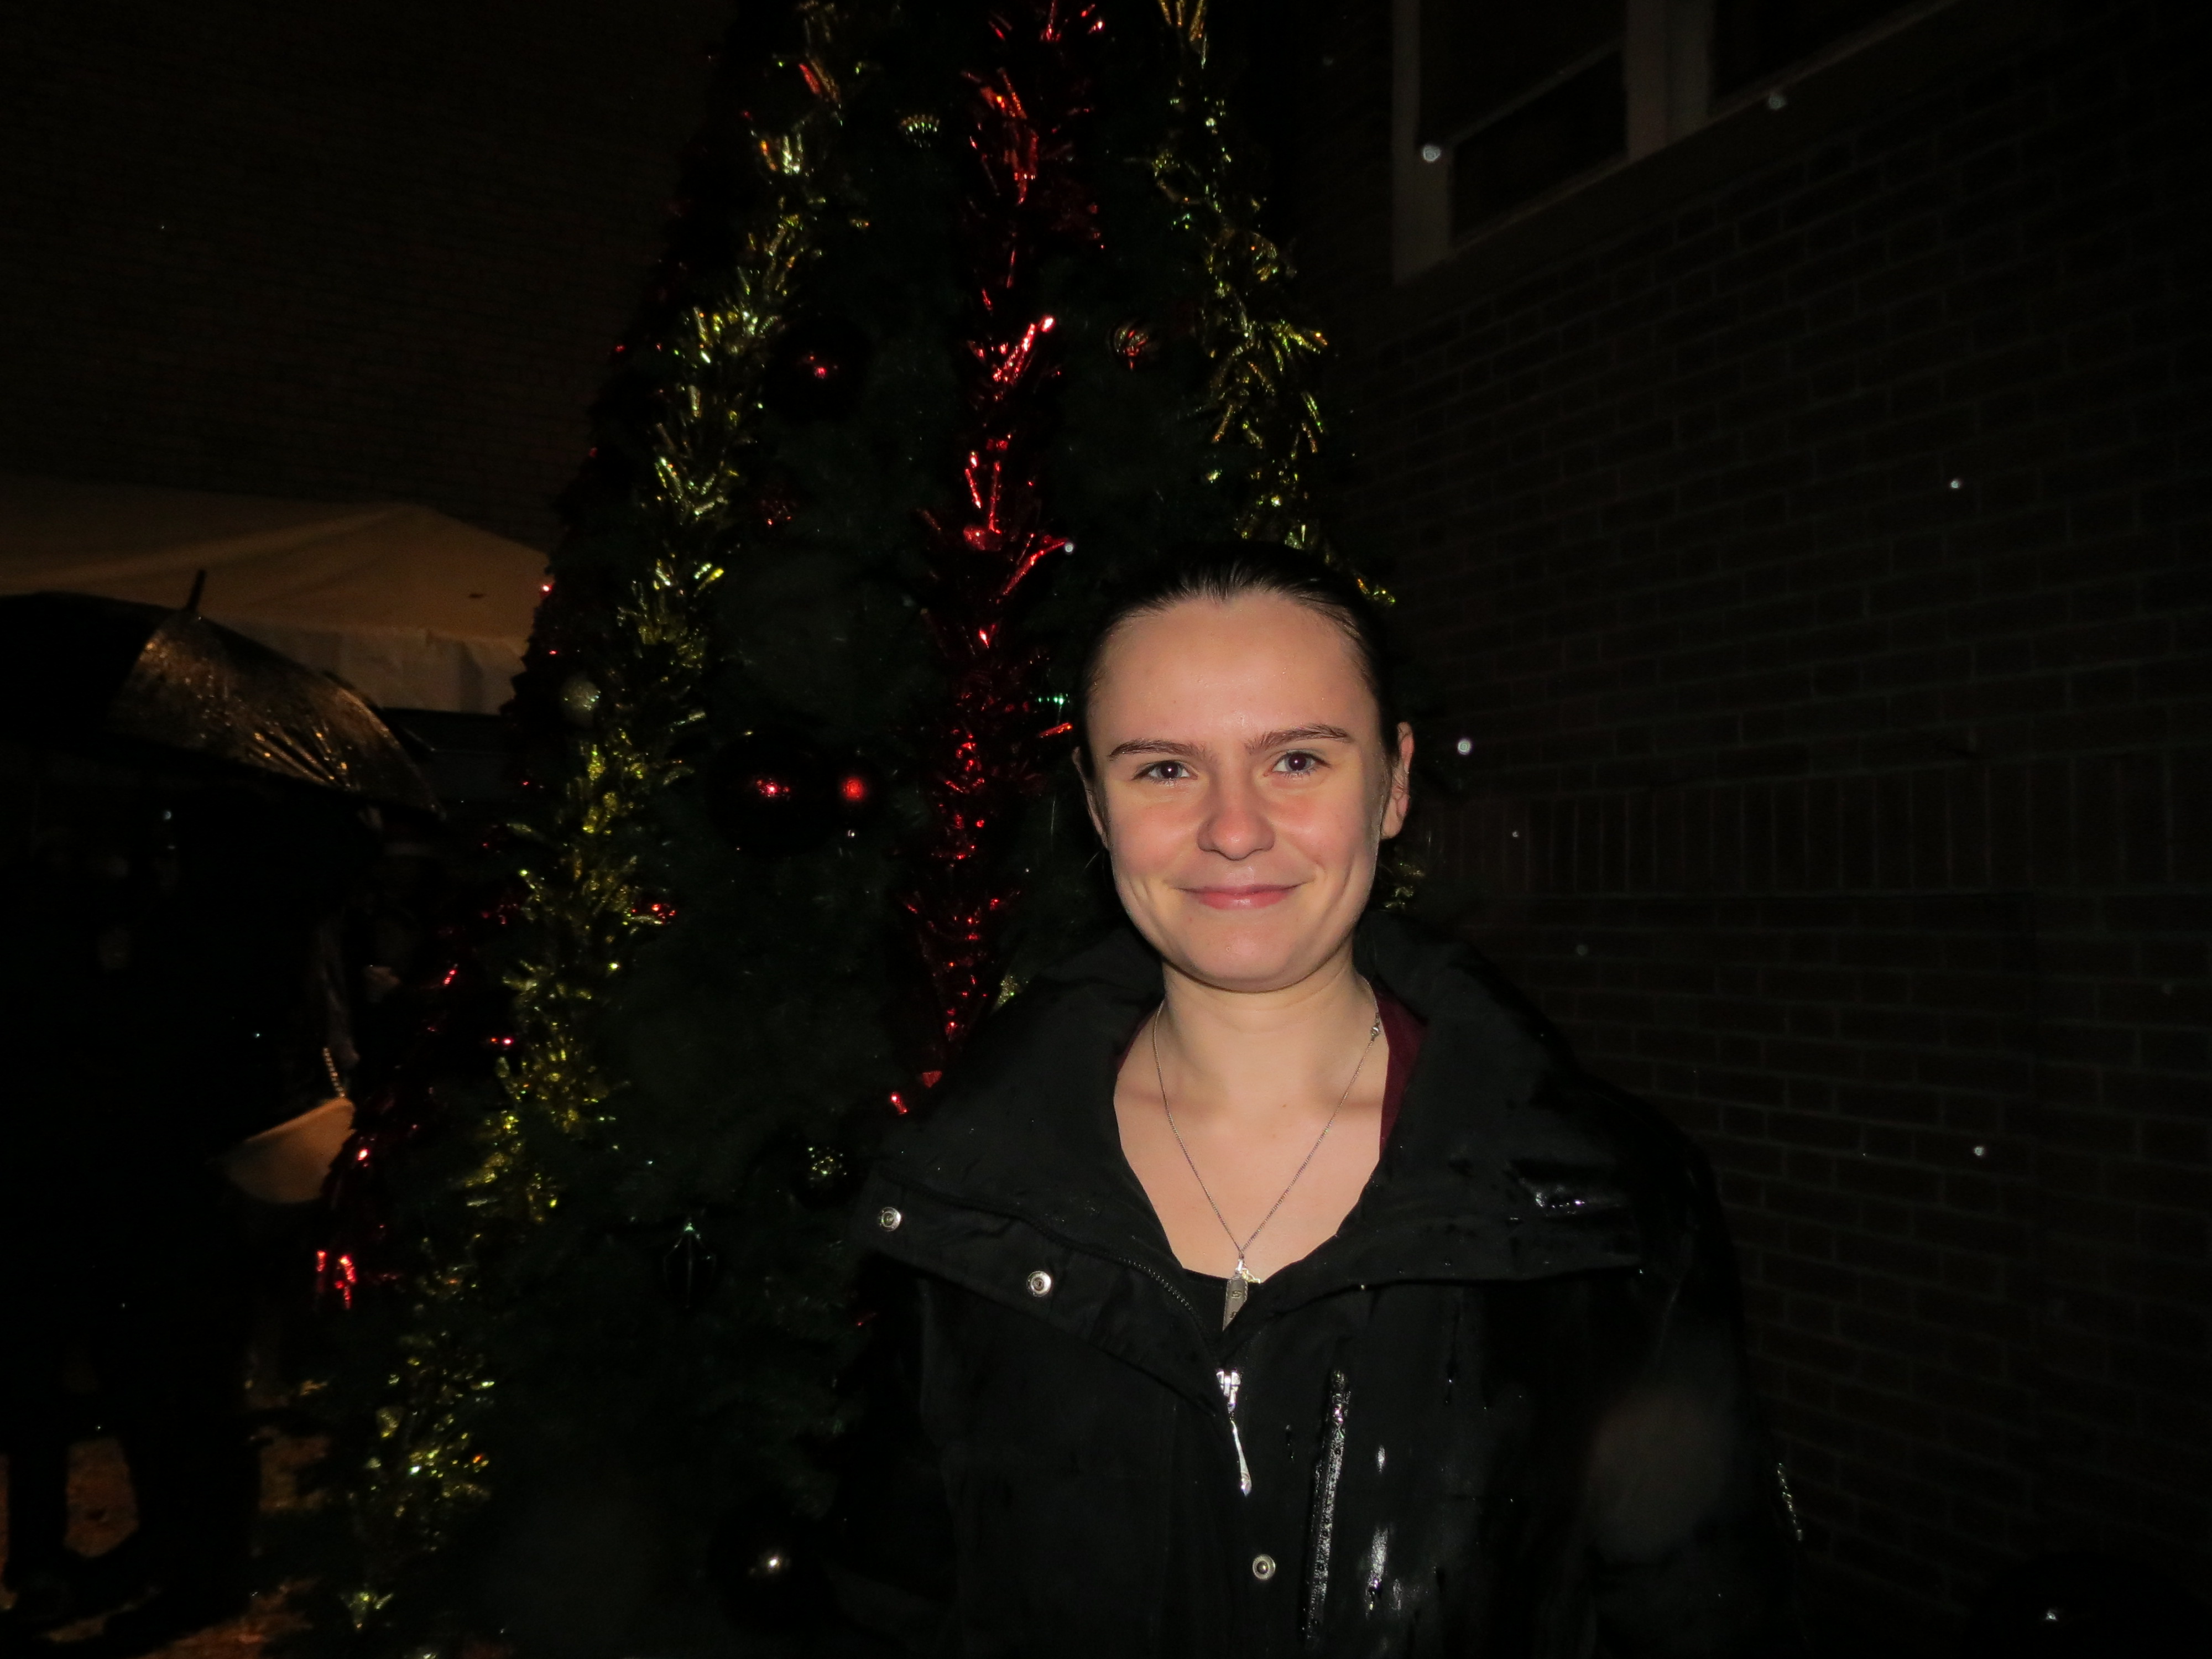 Queens Metropolitan High School senior Samantha Vidal helped to collect donations for military troops at the tree lighting for the program "Operation Give Back," which she founded as a freshman.